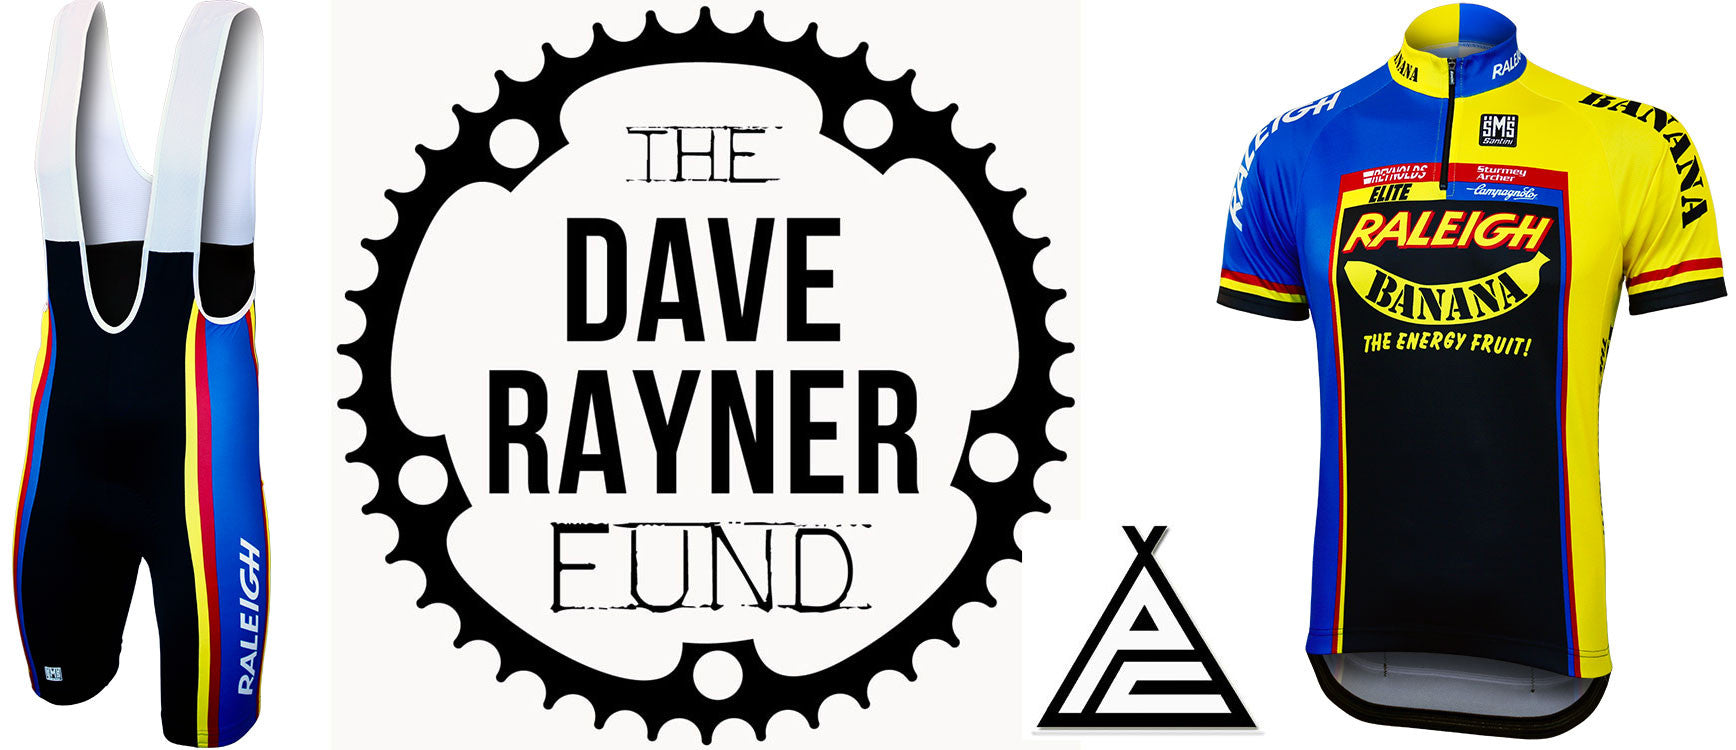 £18,000 donated to the Dave Rayner Fund & Raleigh Banana Retro Kit Announced!